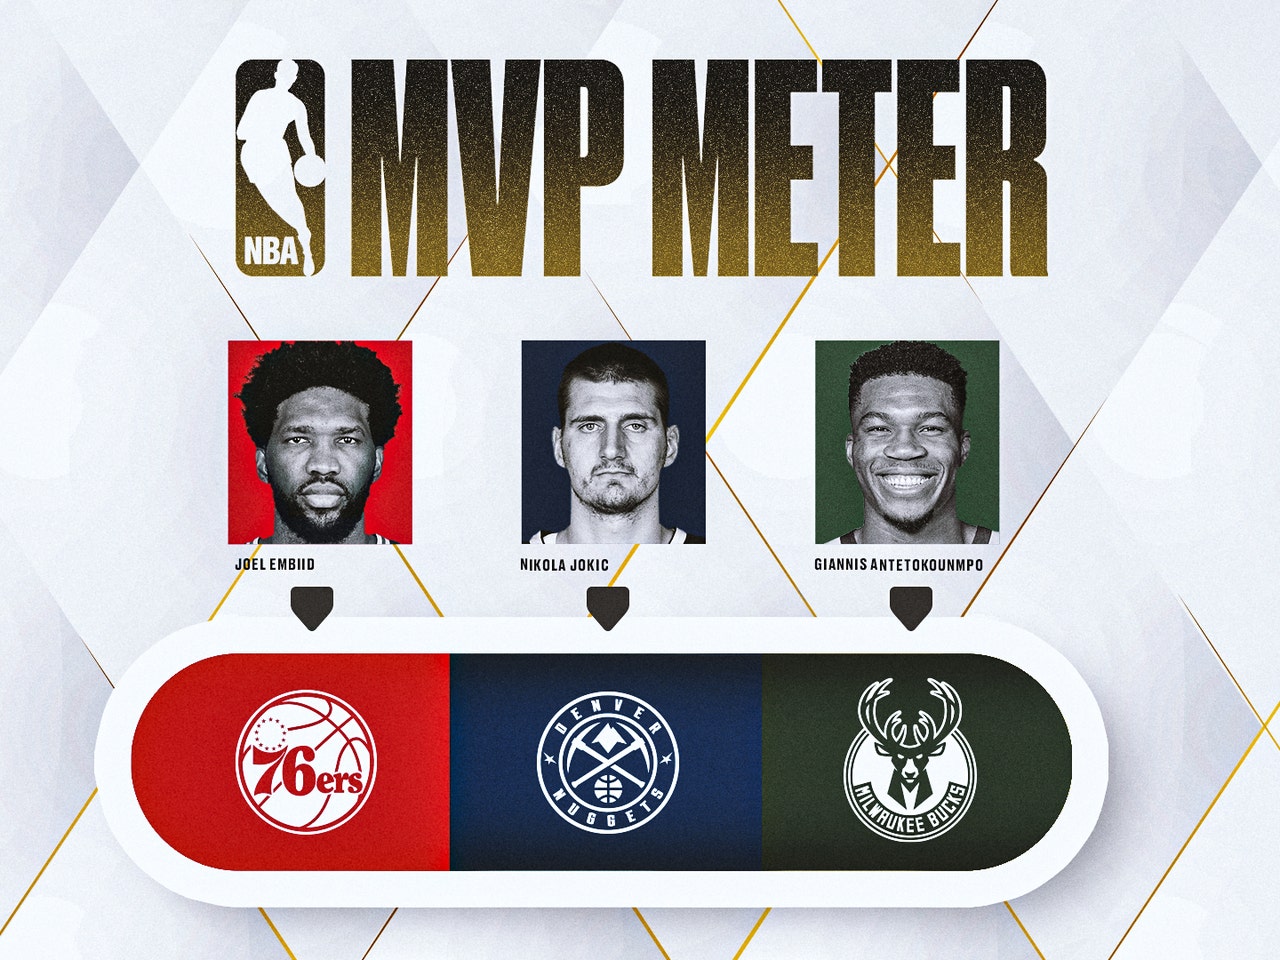 LV Is the NBA's Latest MVP